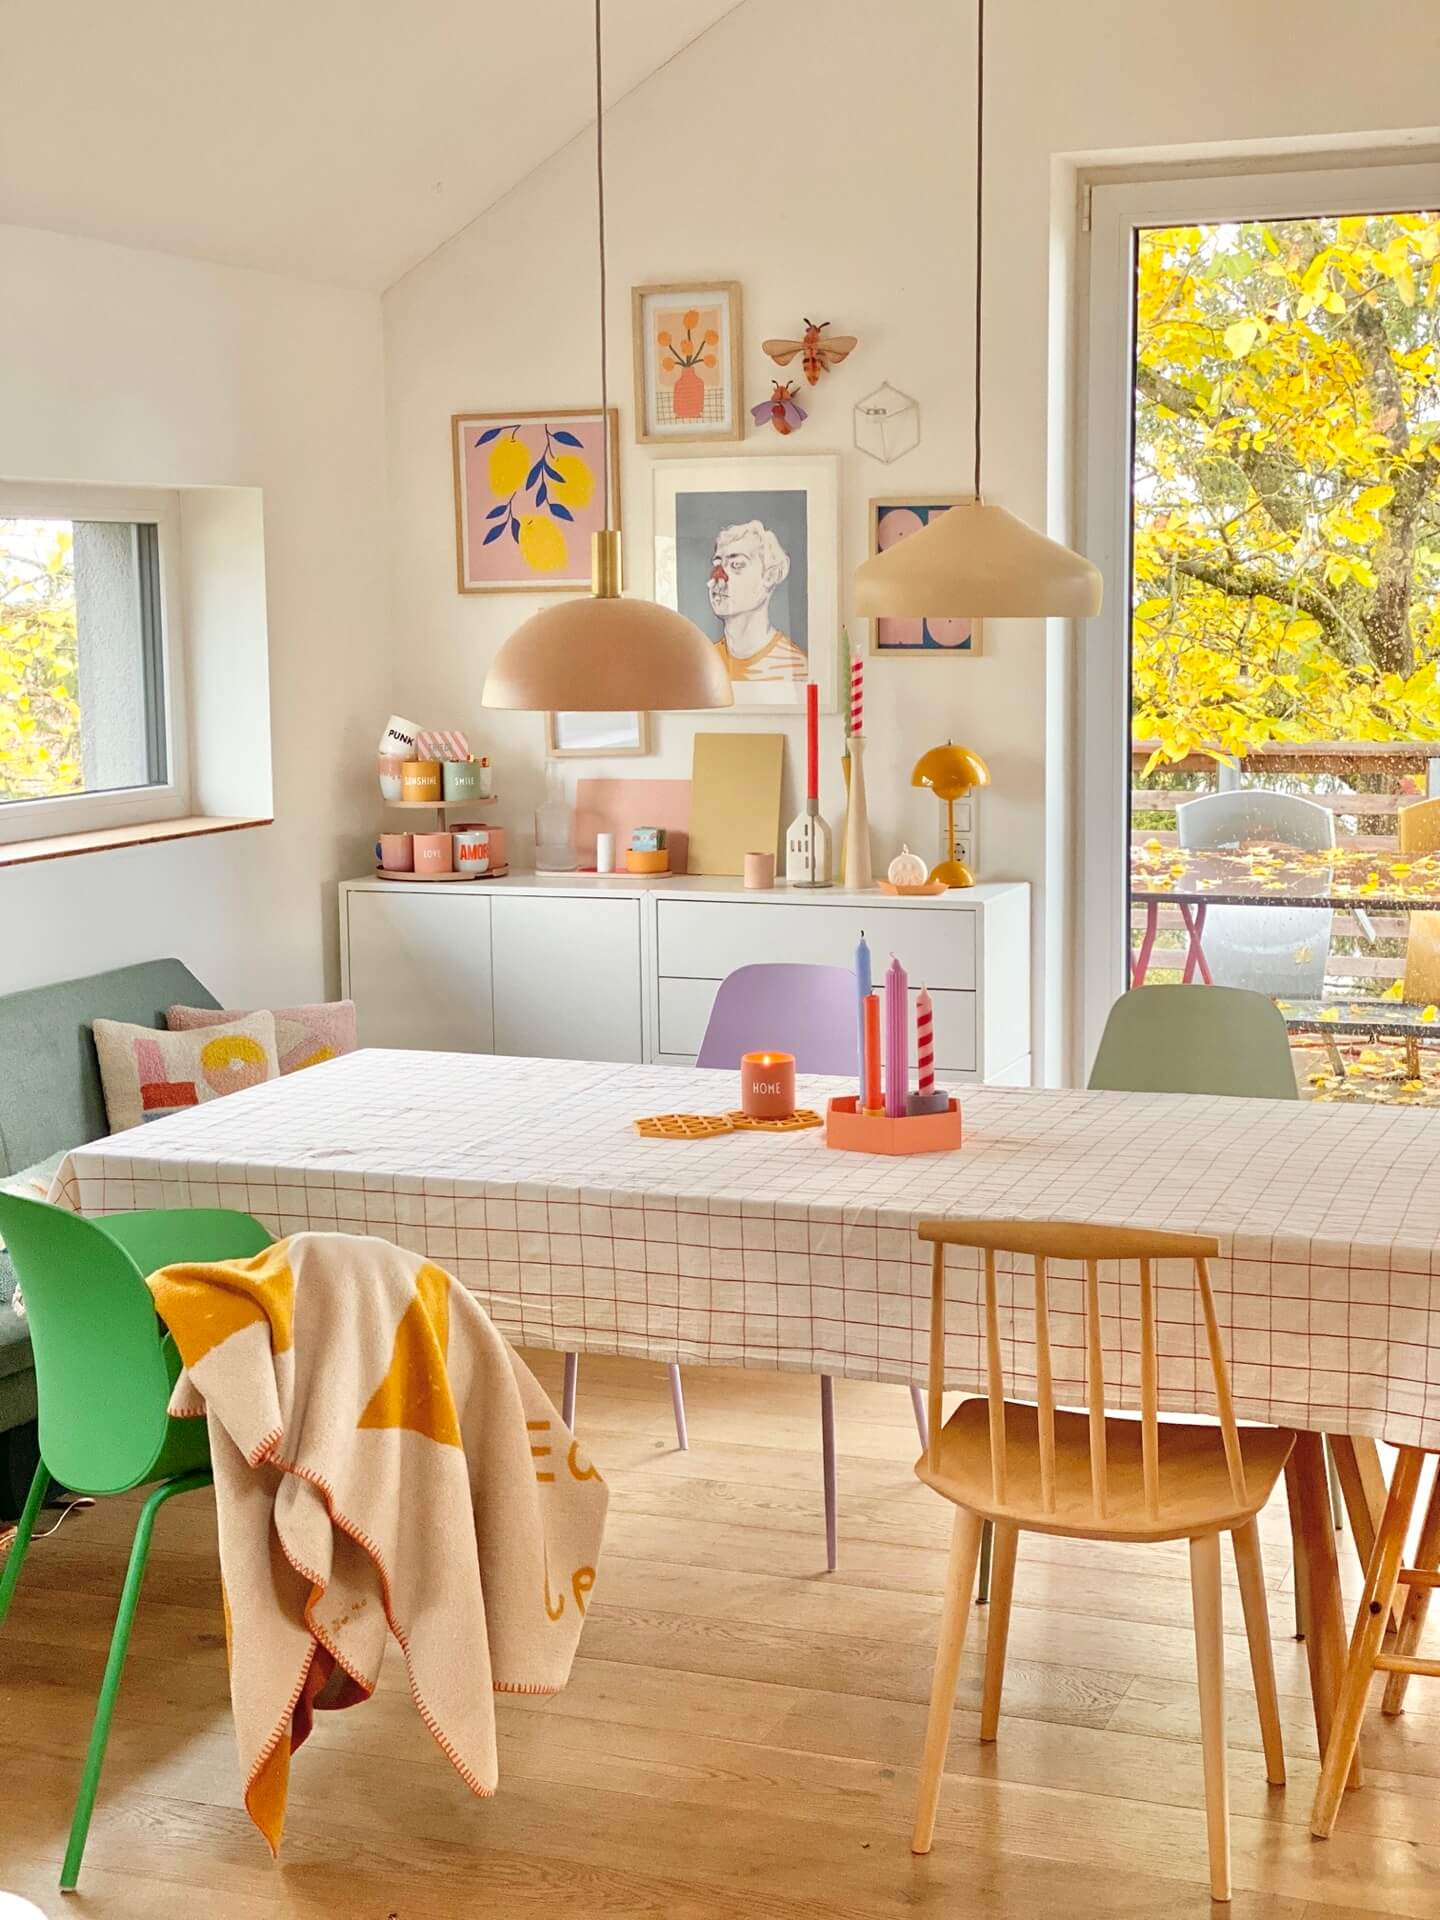 home tour with Yve Michels, designer at interior design company prettylittlespace in Germany